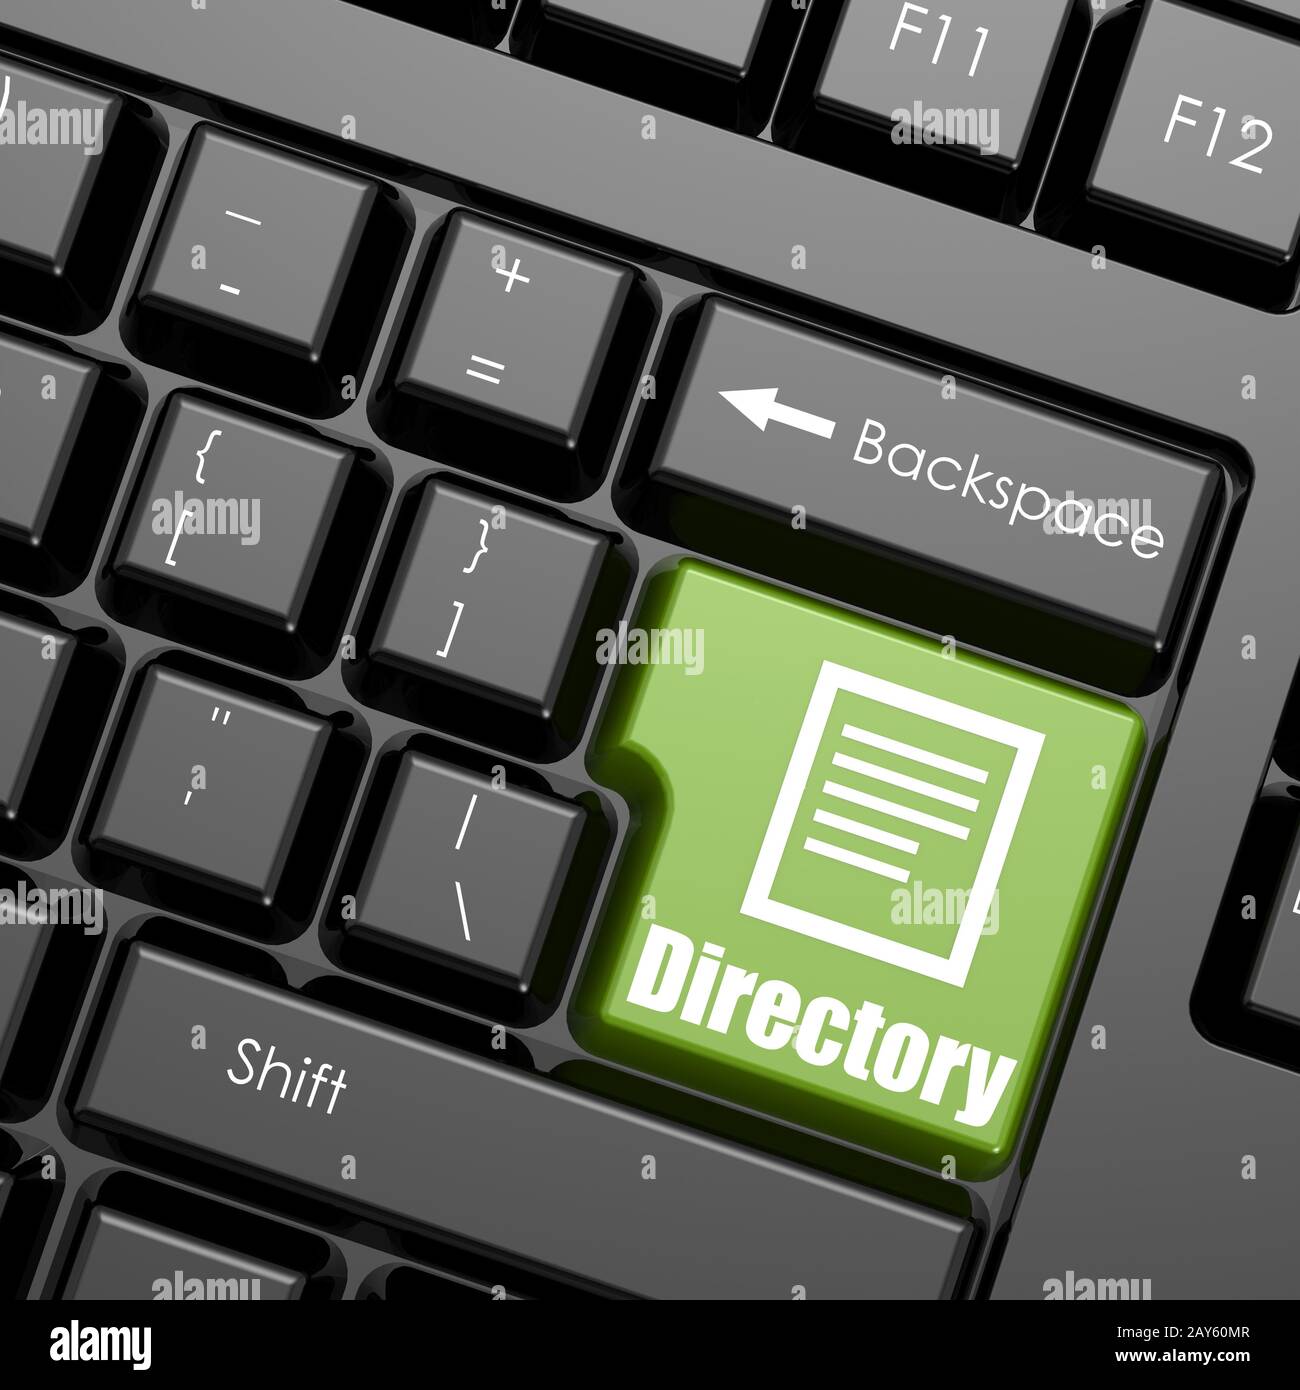 Computer keyboard with word directory Stock Photo